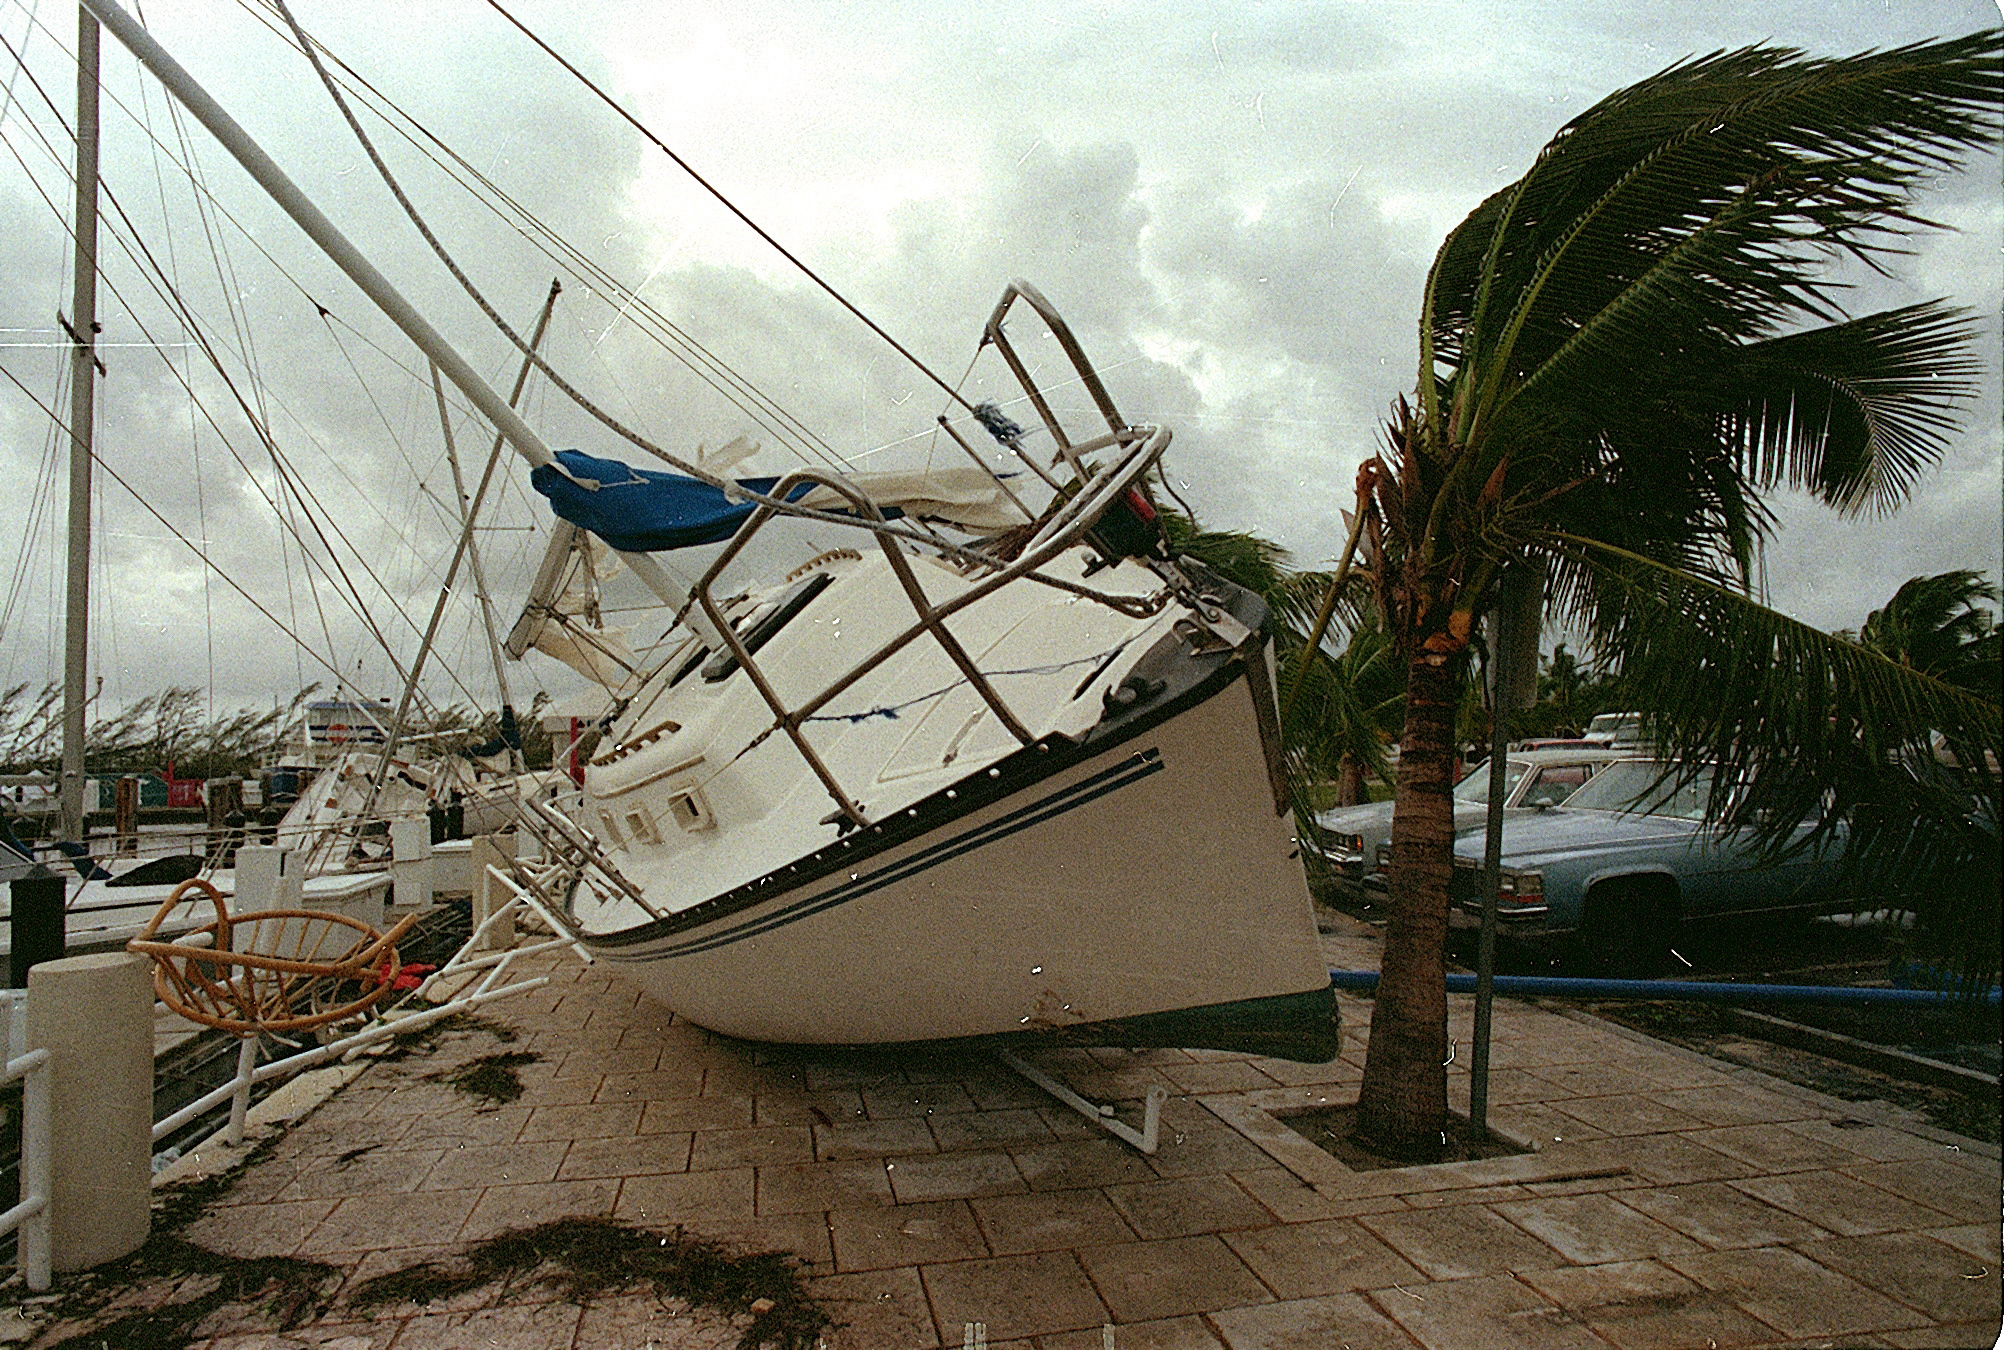 how strong were the winds of hurricane andrew in 1992